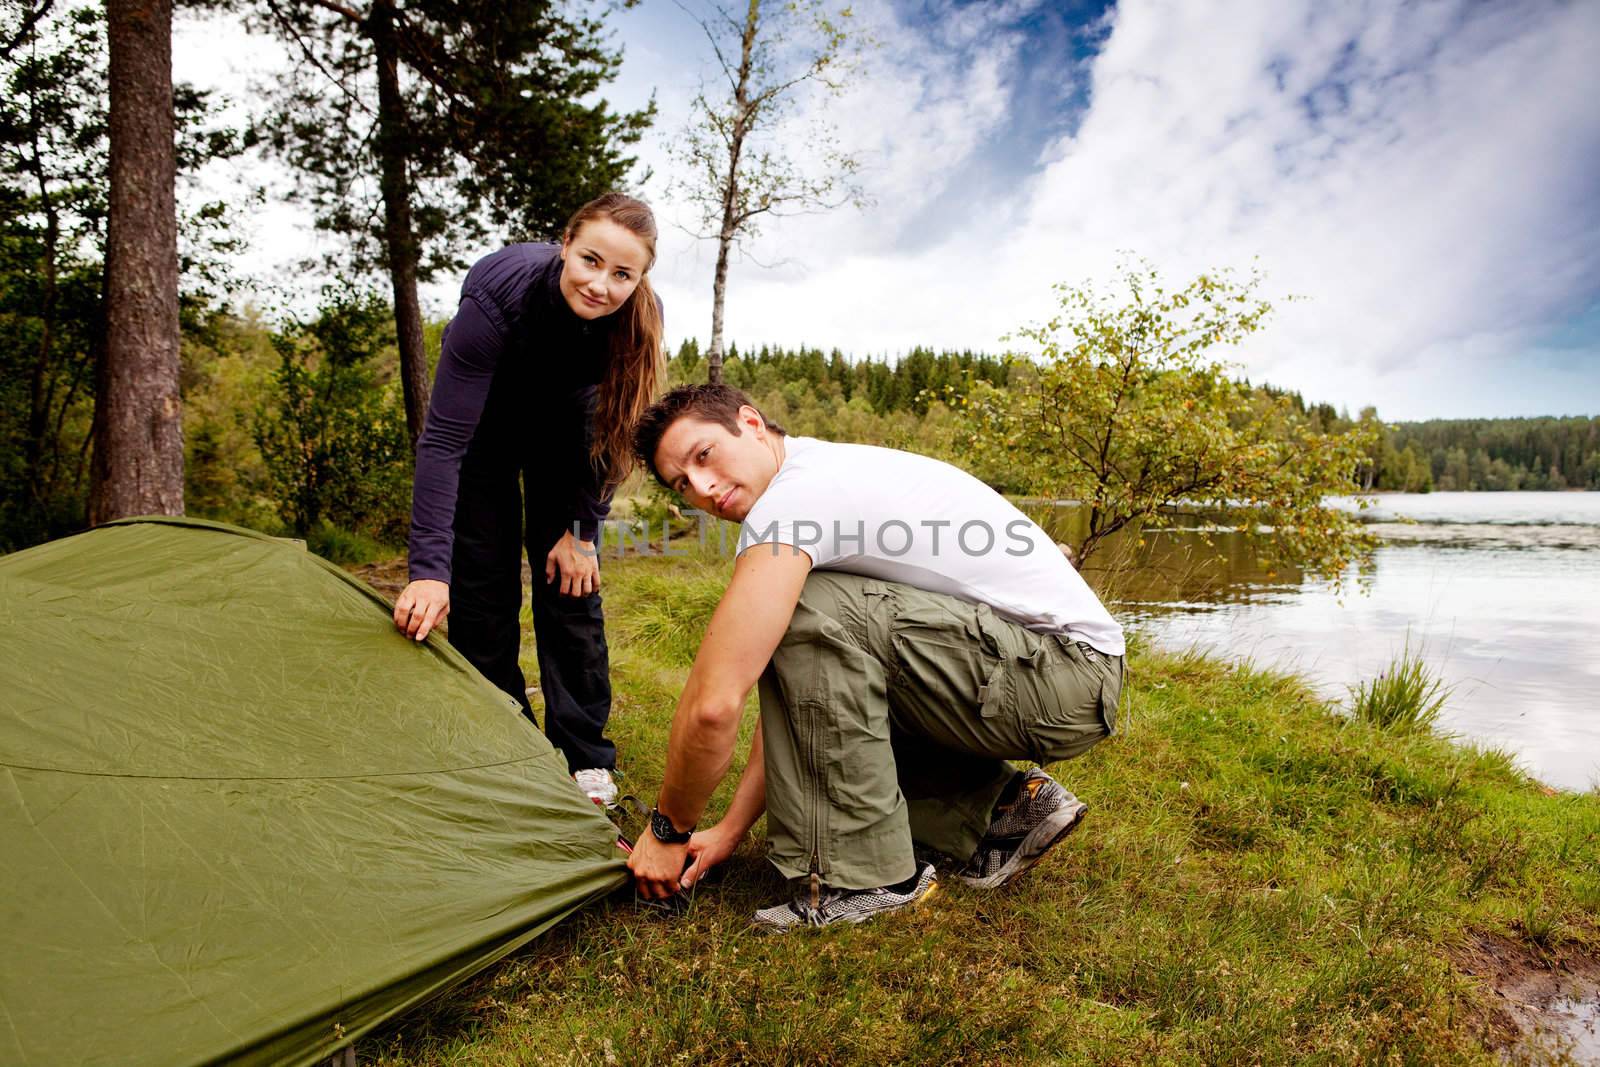 Camping Man and Woman by leaf